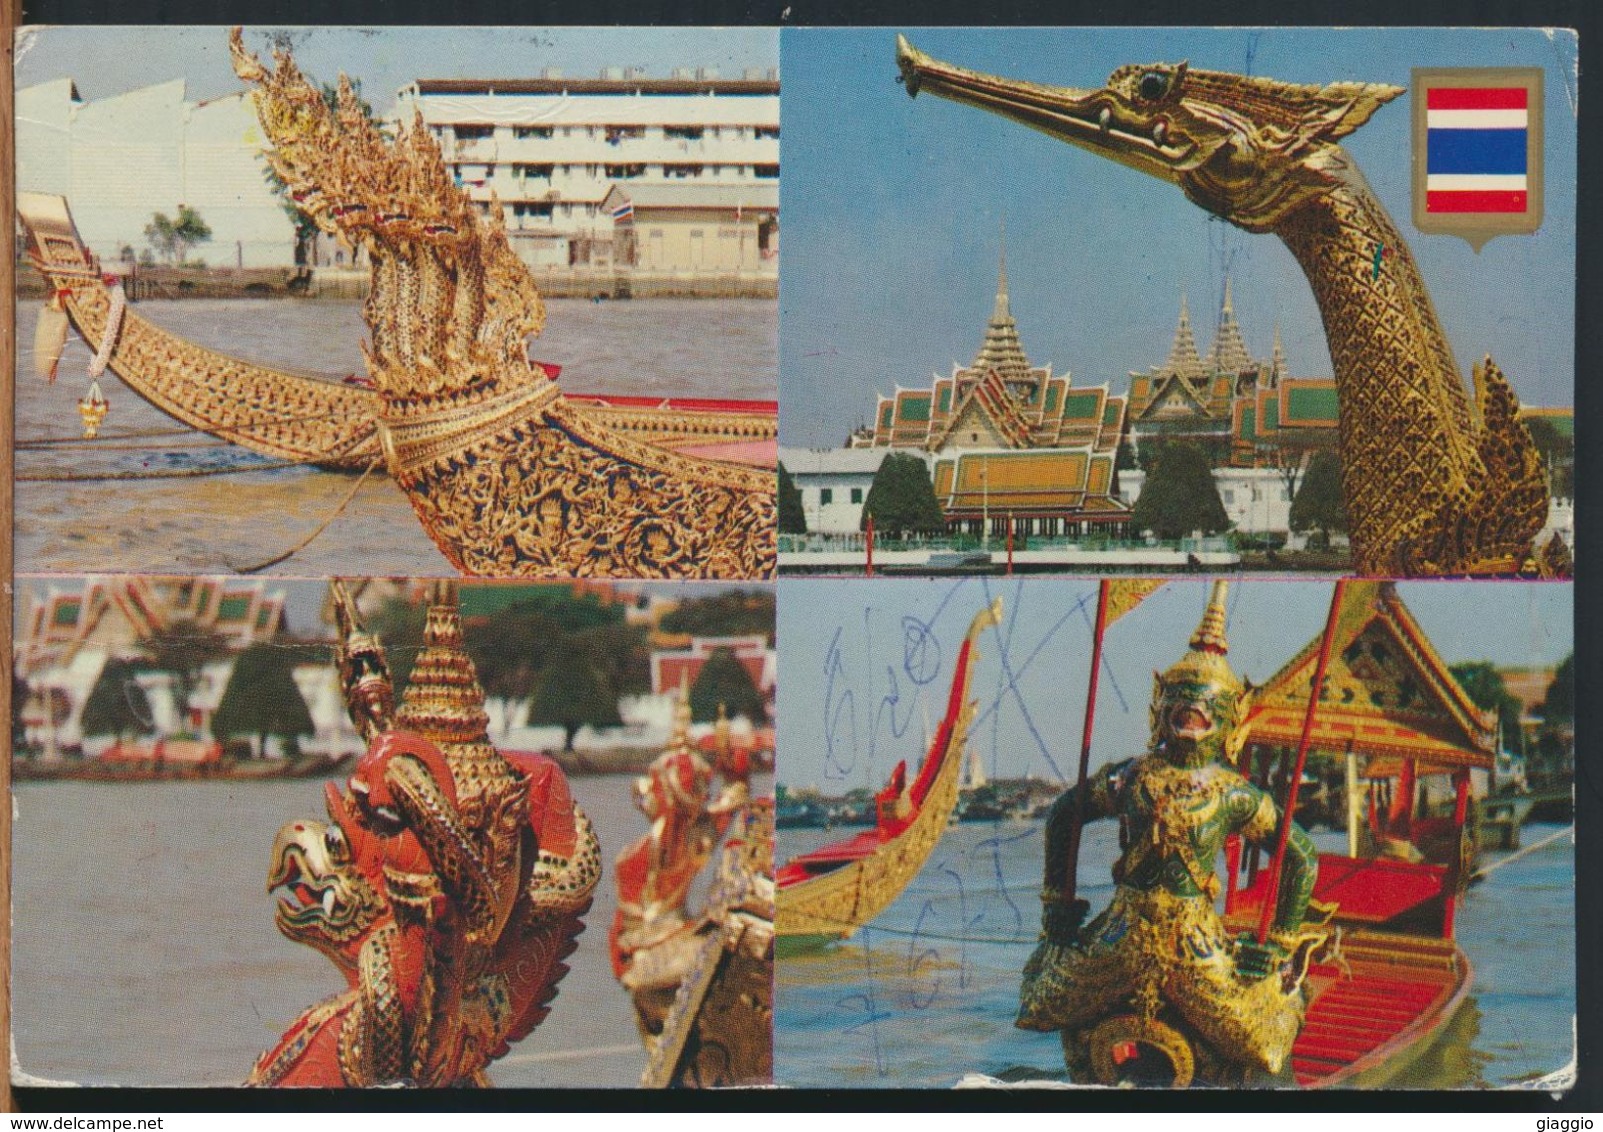 °°° 10908 - THAILAND - ROYAL BARGES IN PROCESSION ON CHAO PHYA RIVER - 1989 °°° - Tailandia